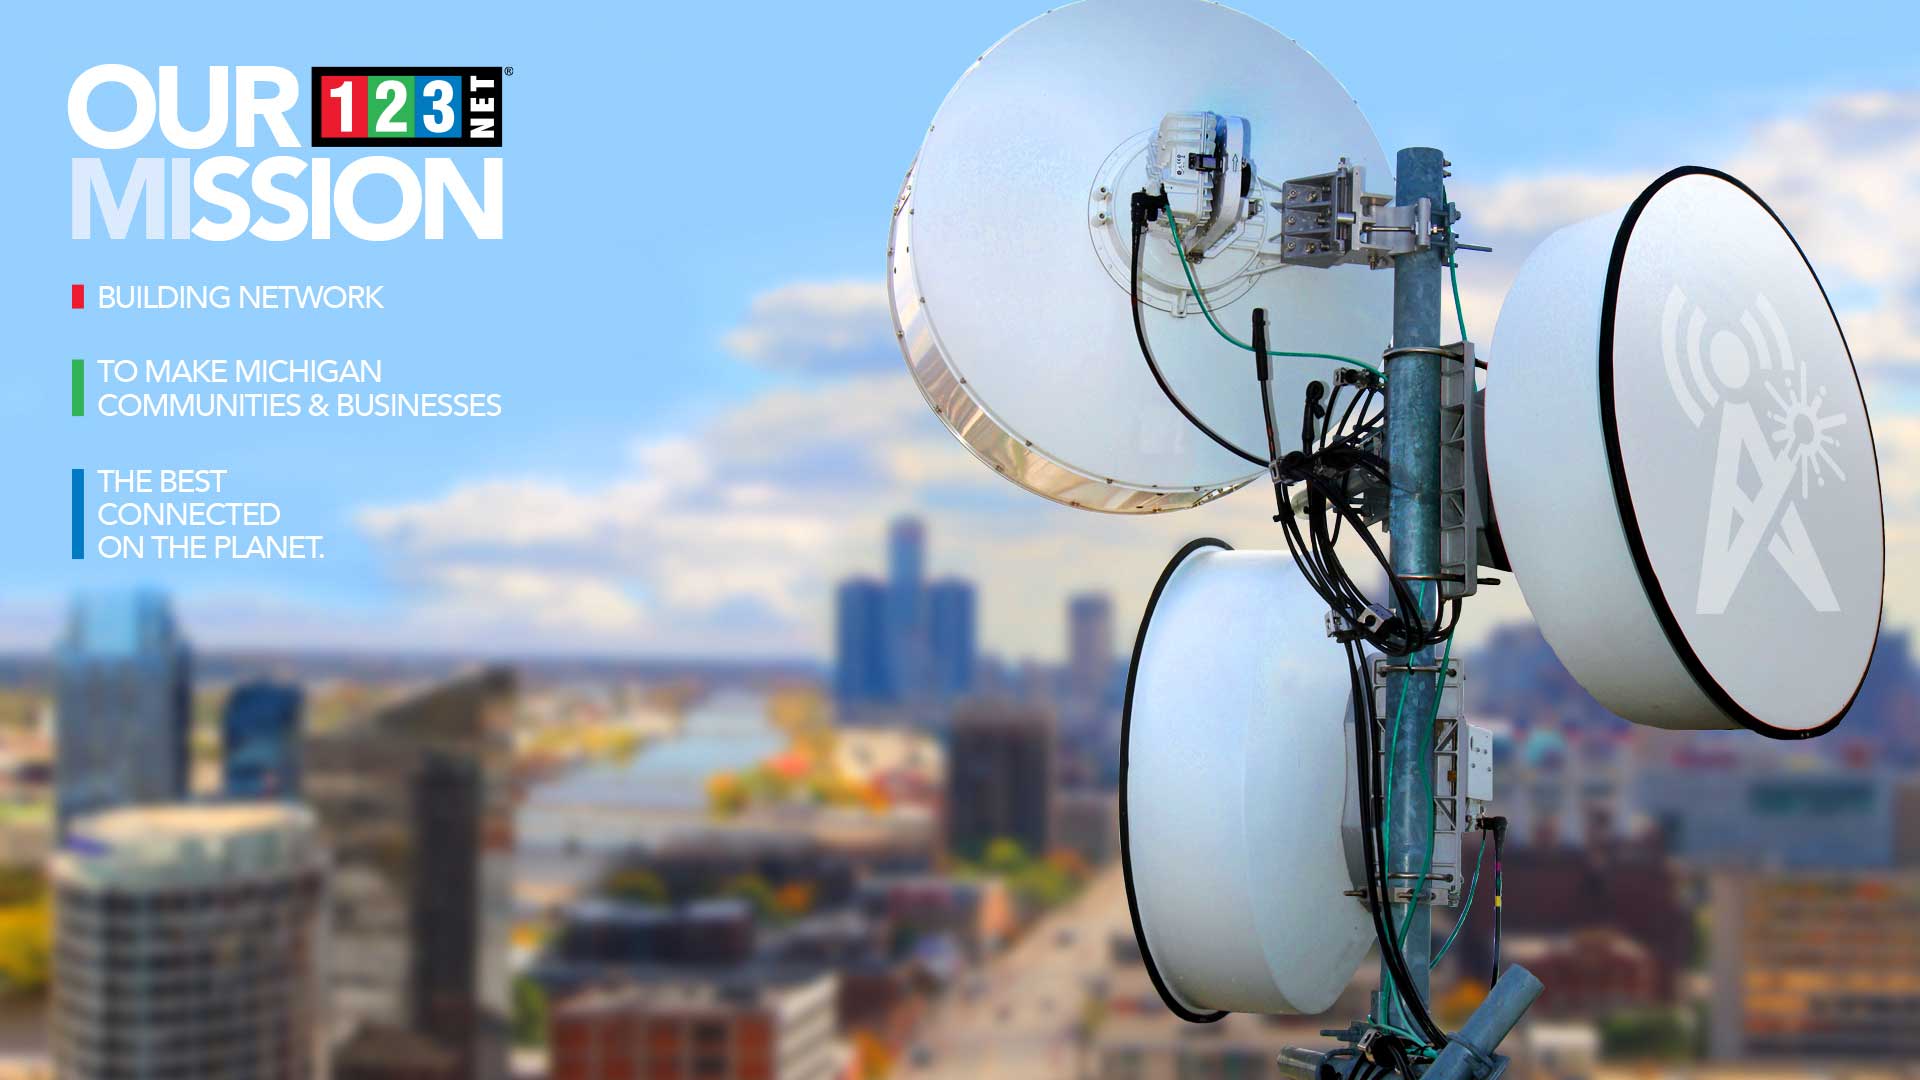 fixed wireless towers over a Michigan metro area like detroit or Grand Rapids that provide internet and network services from 123NET